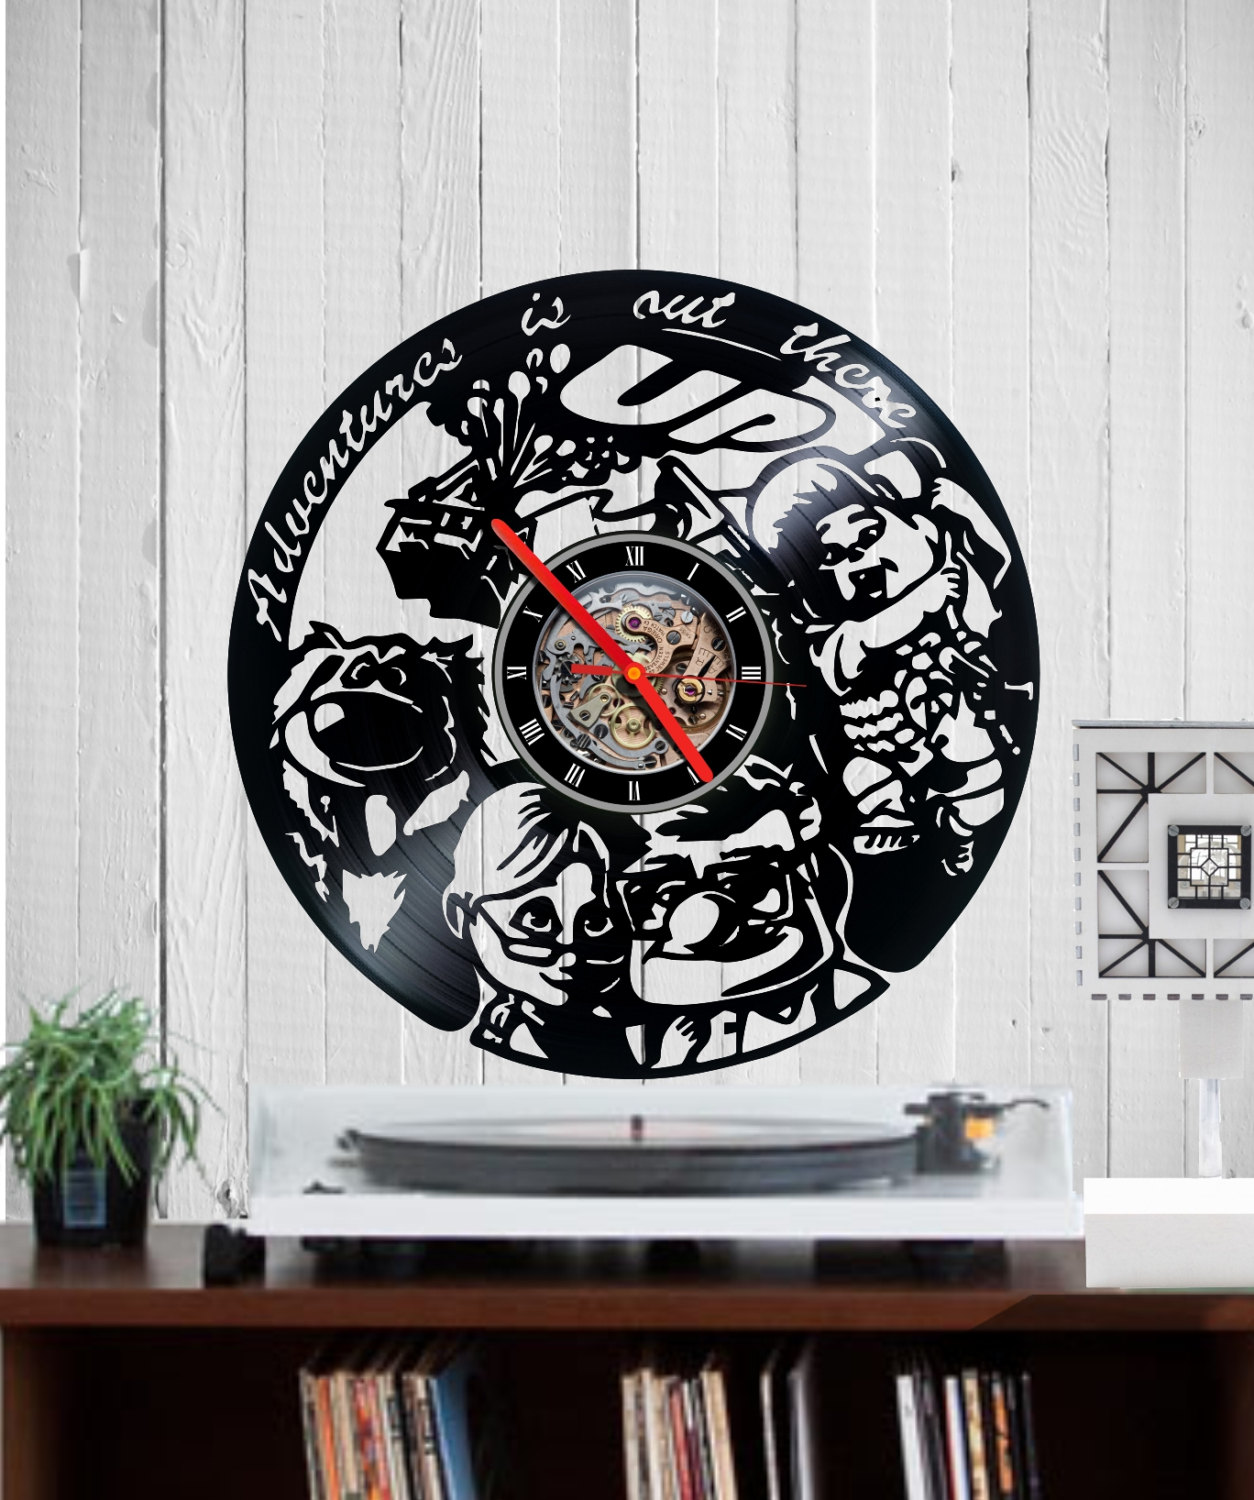 Details about   LED Clock SPA Vinyl Record Wall Clock Led Light Wall Clock 1799 